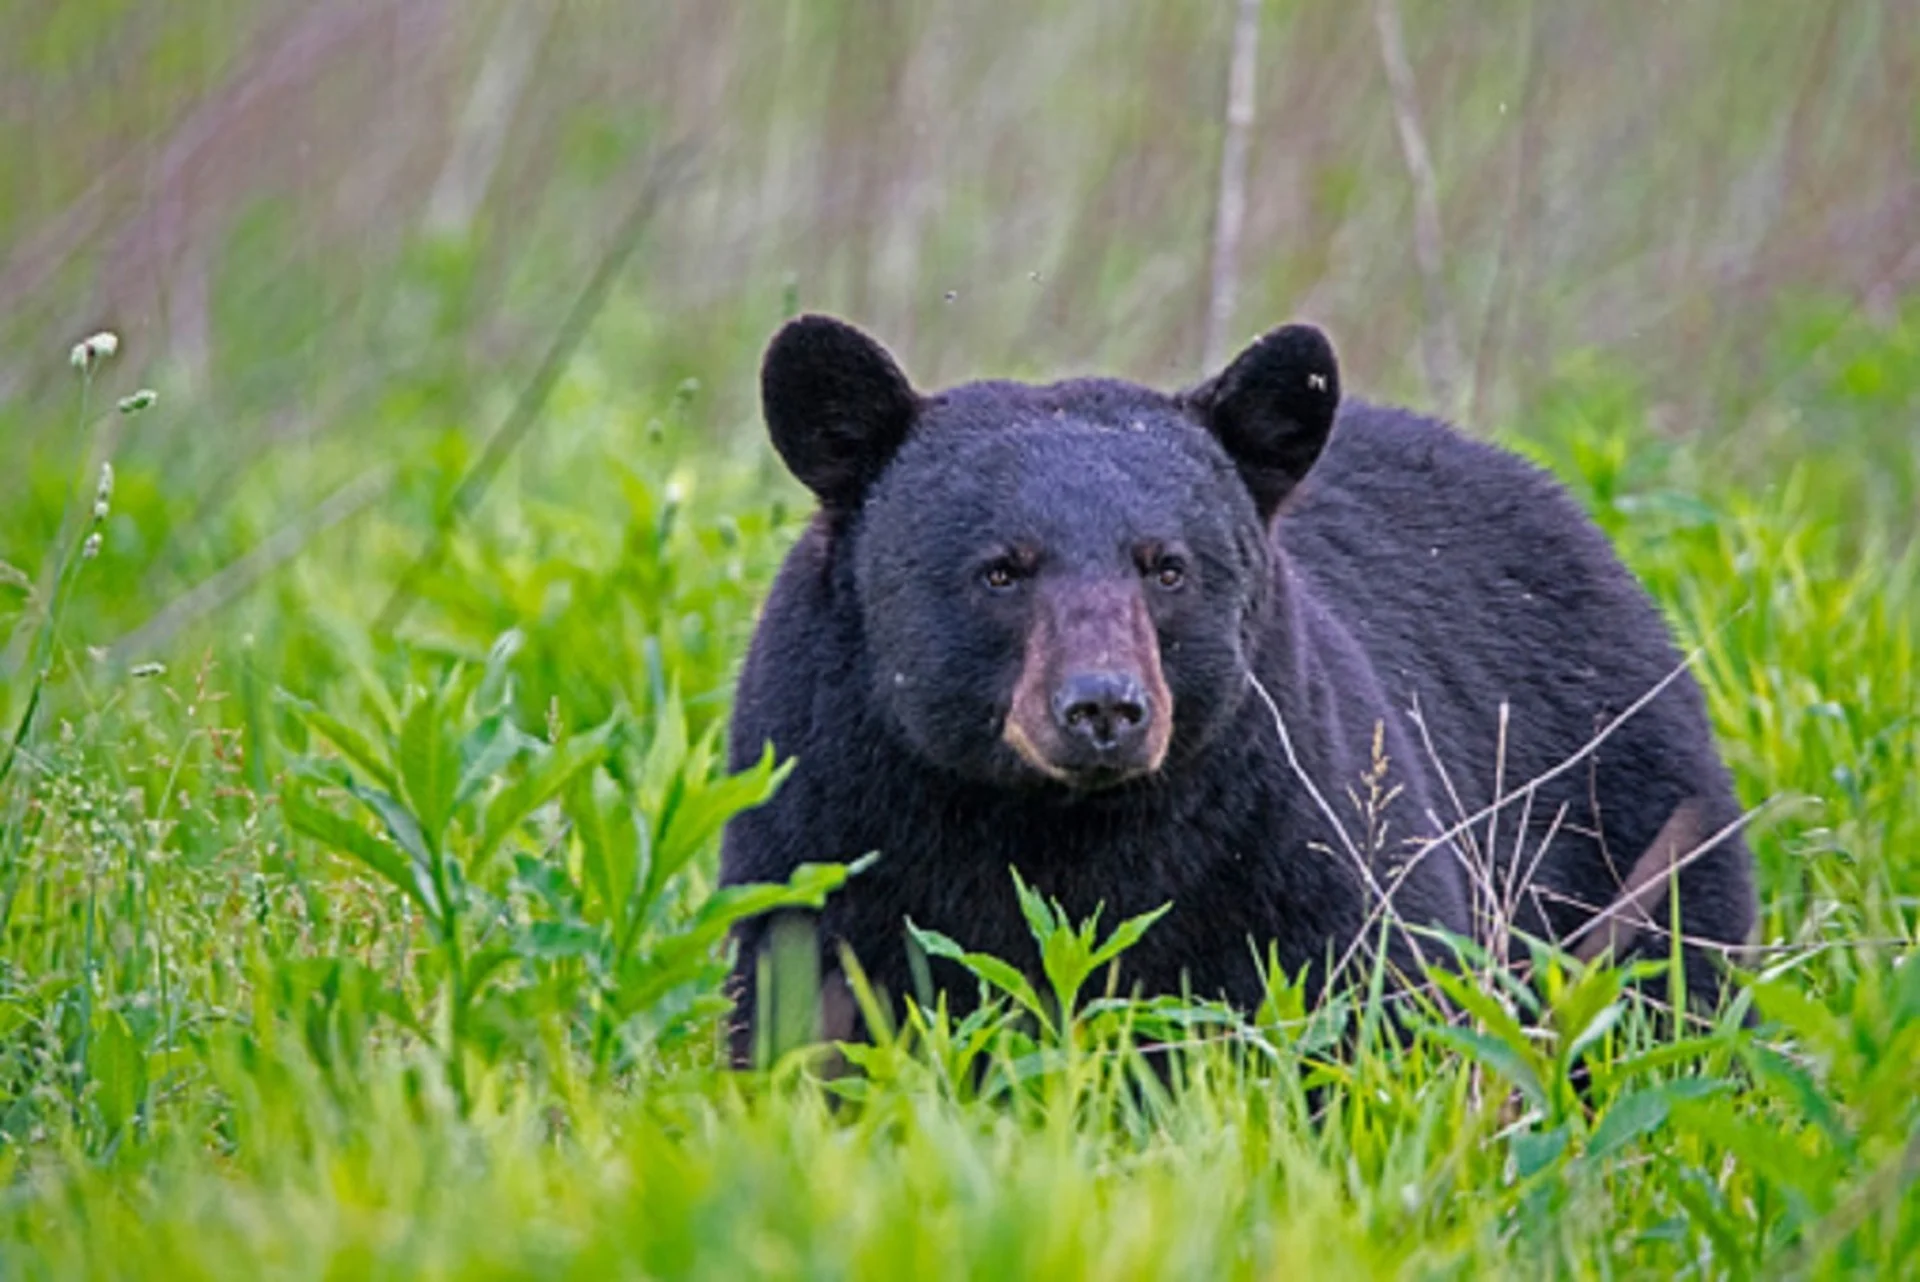 Black bears are waking up, here's how to stay safe